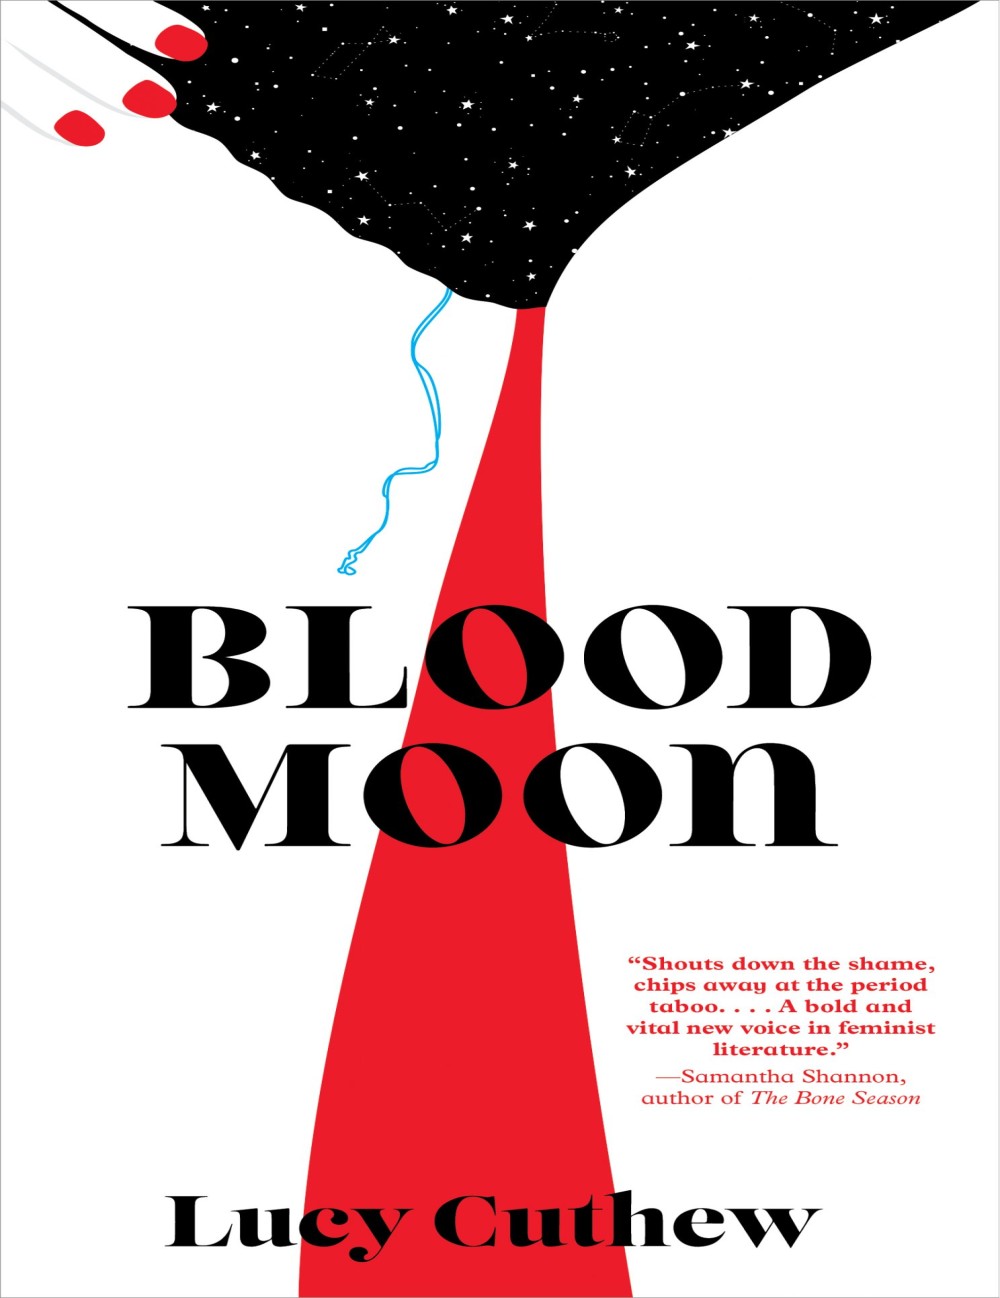 'Blood Moon' by Lucy Cuthew